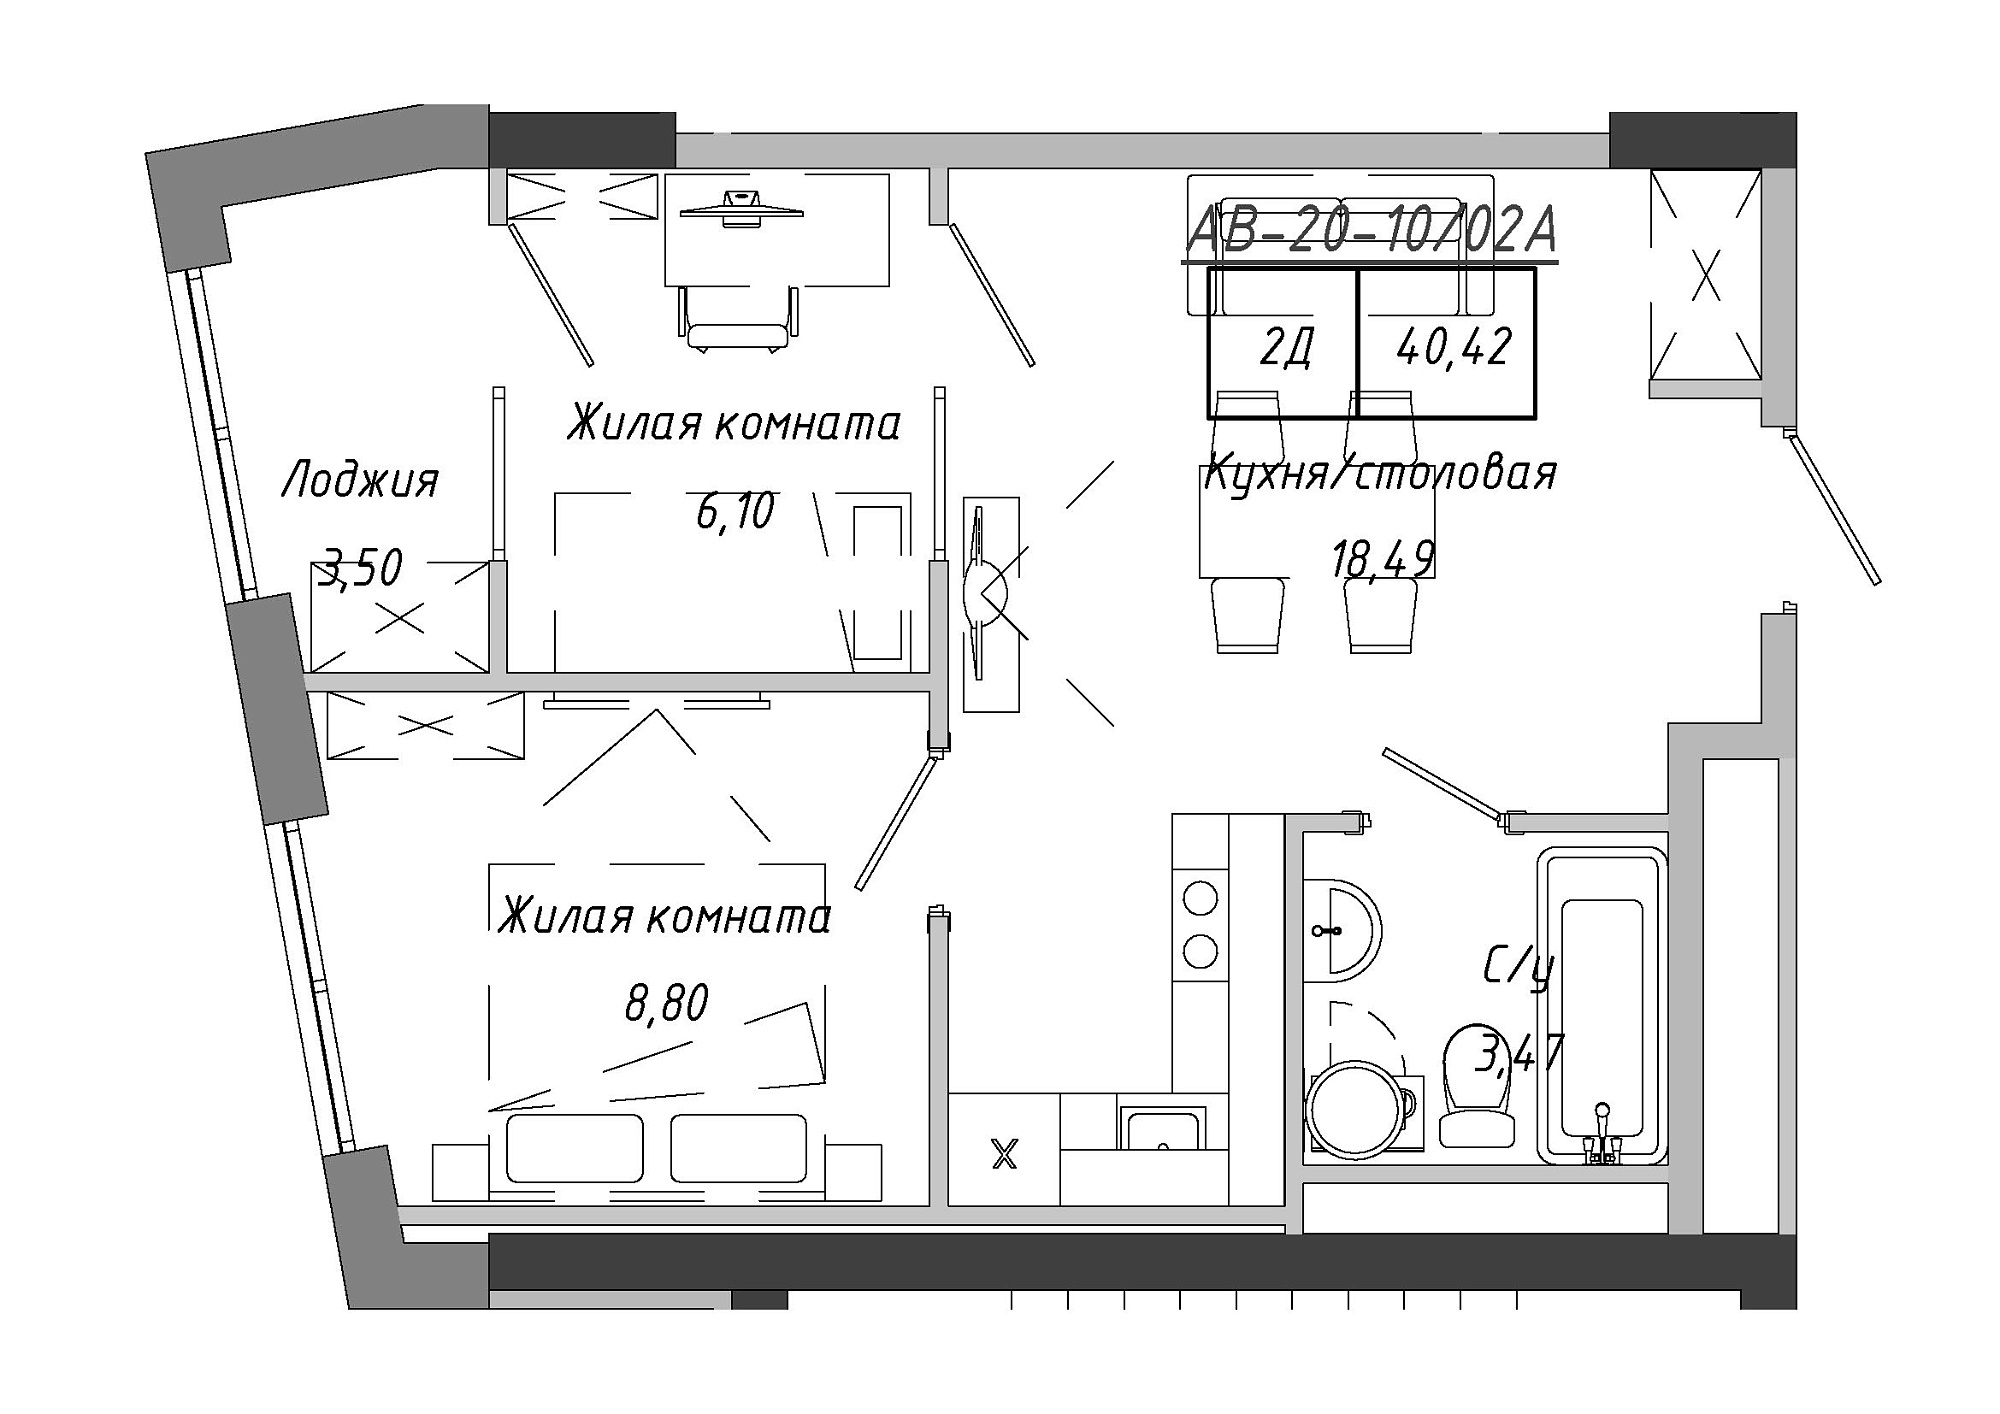 Planning 2-rm flats area 41.9m2, AB-20-10/0002а.